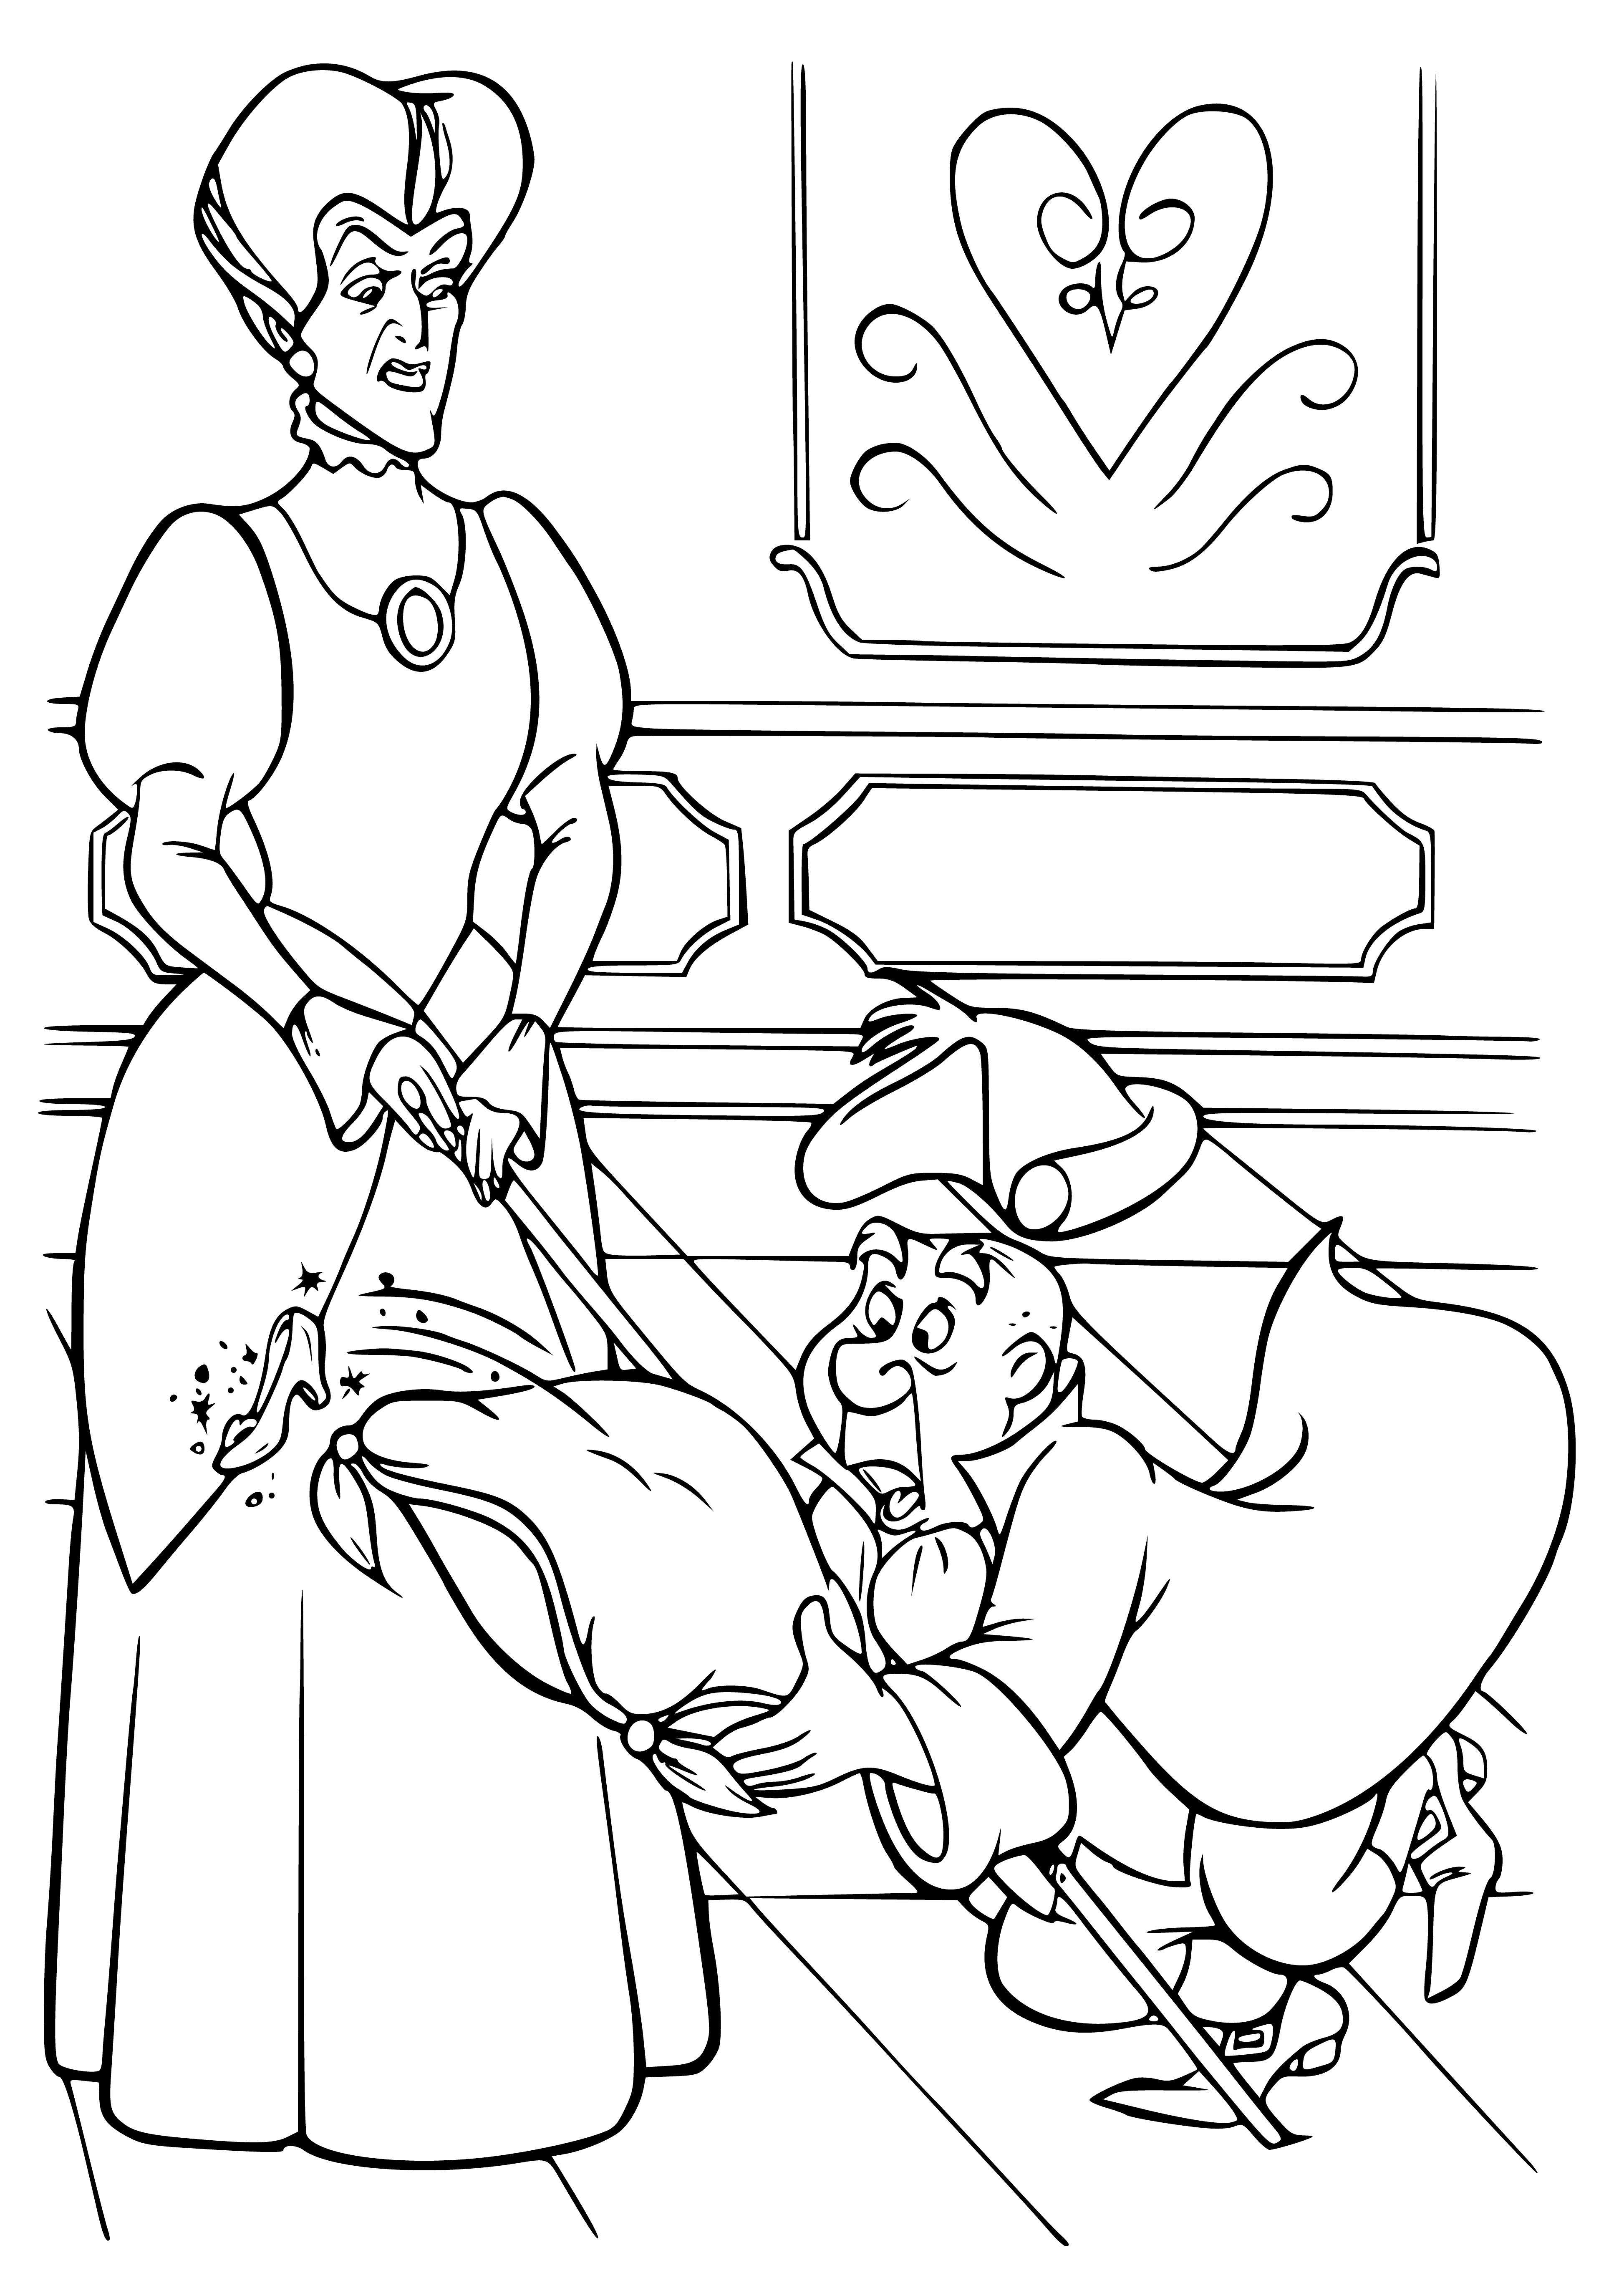 coloring page: Cinderella walking through wheat field, long dress billowing in wind, steps leaving behind a trail of footsteps.